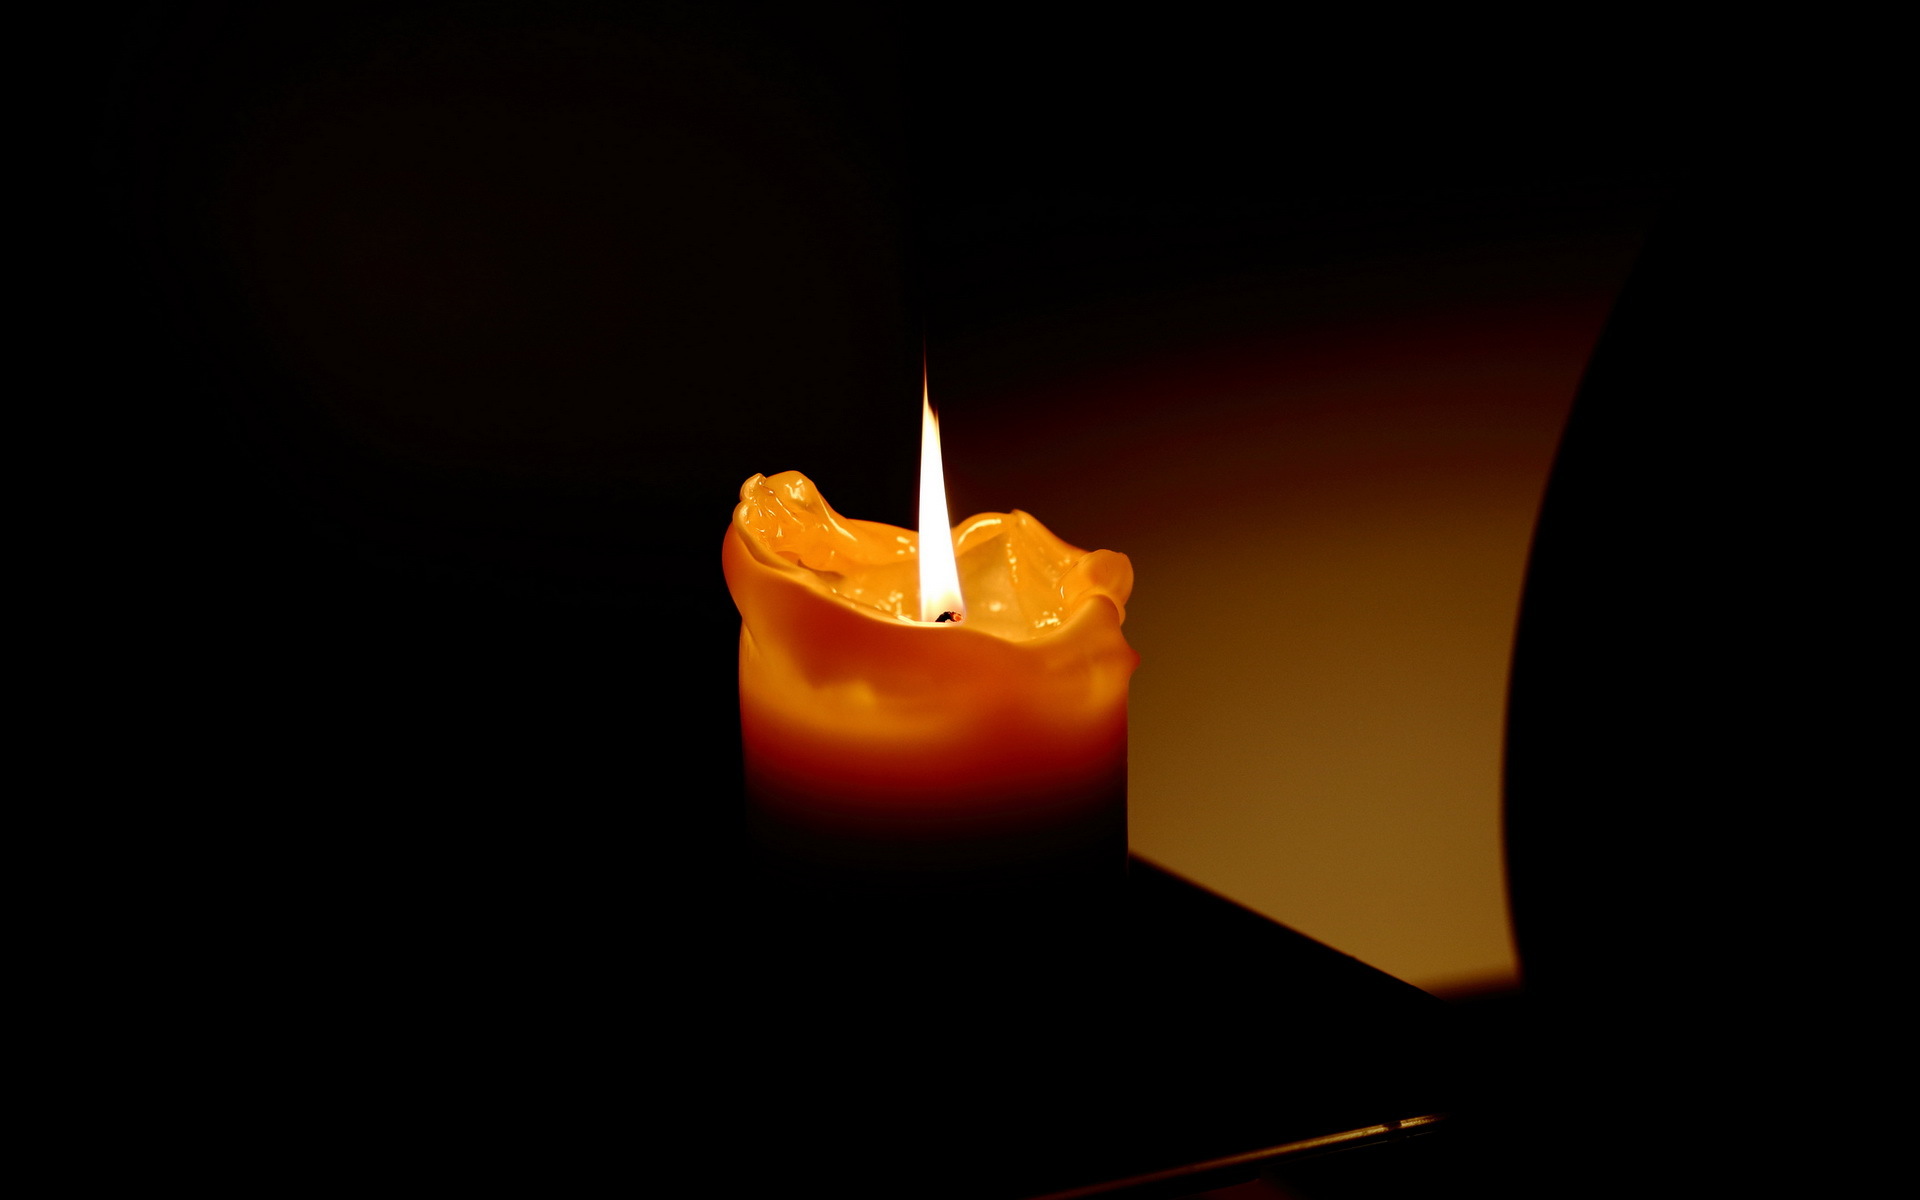 Candle Computer Wallpapers Desktop Backgrounds 1920x1200 ID